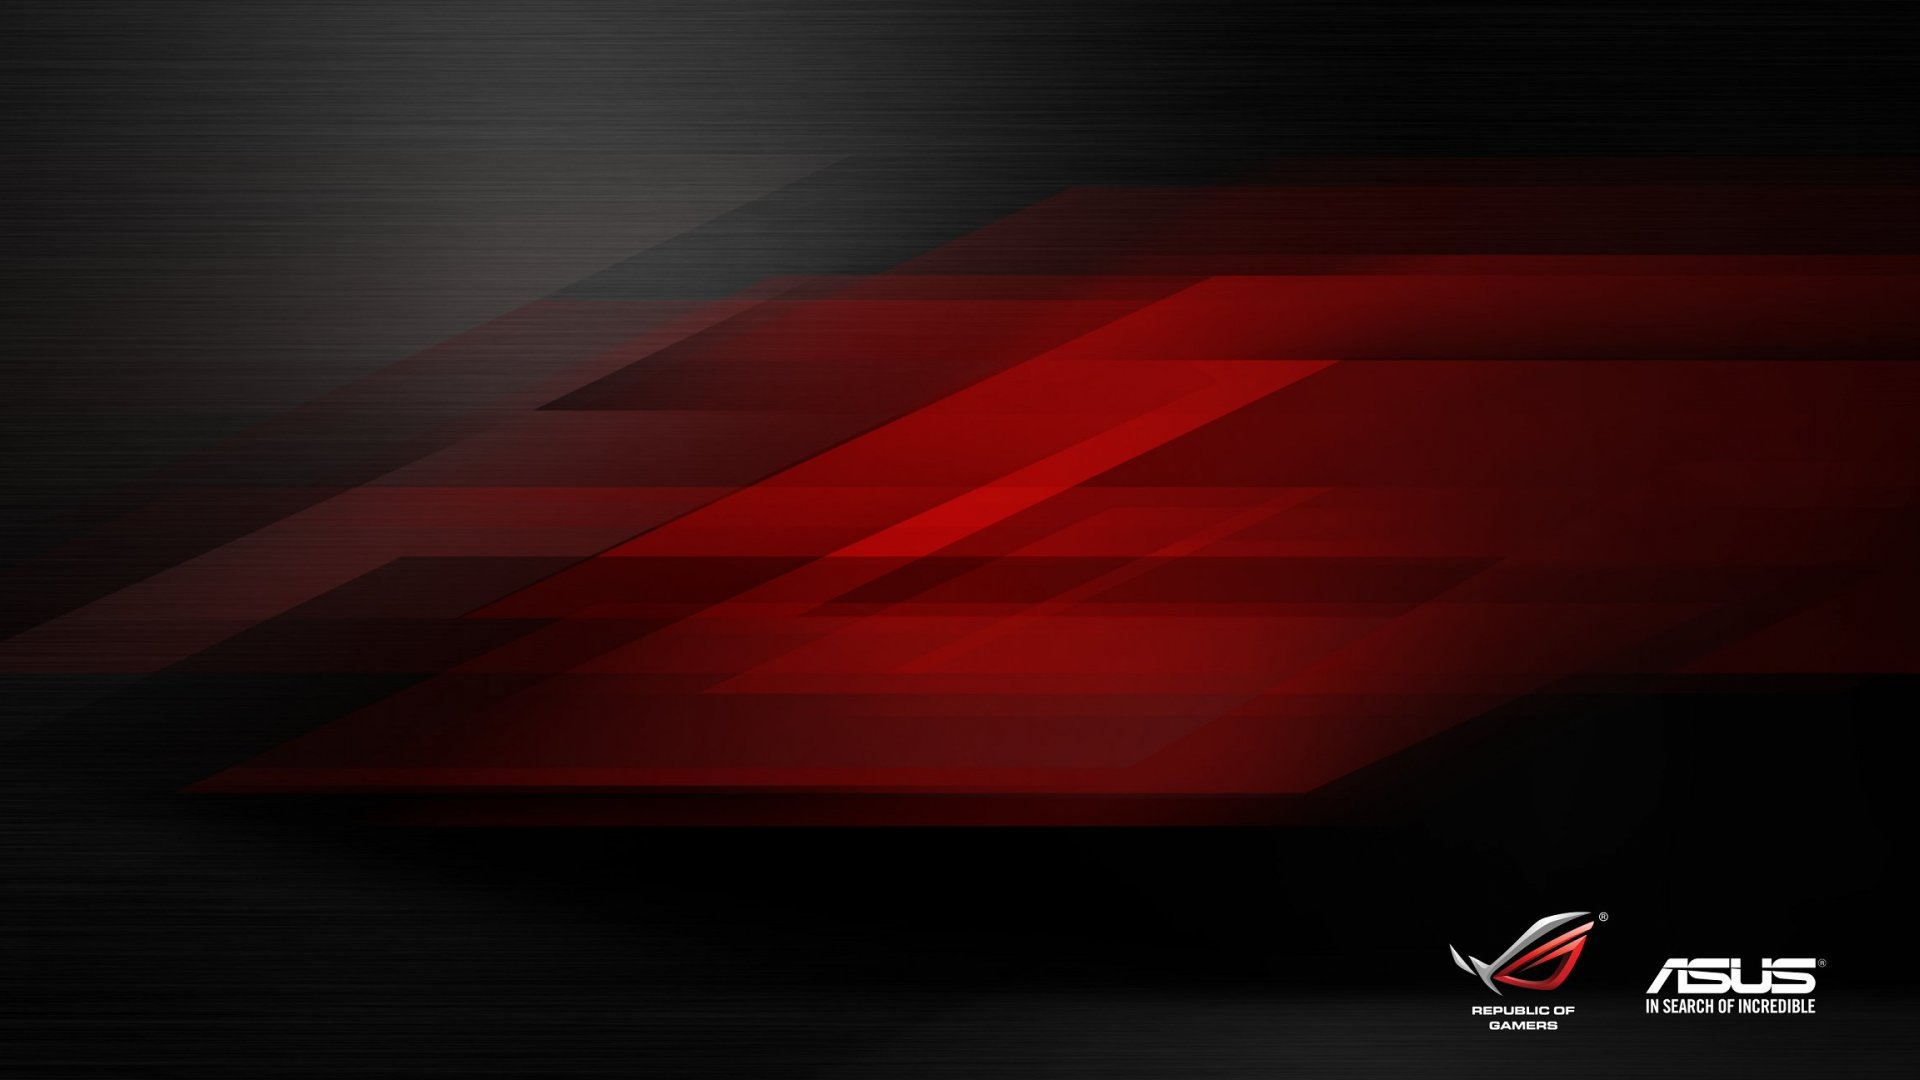 asus in search of incredible wallpaper,red,black,light,maroon,sky